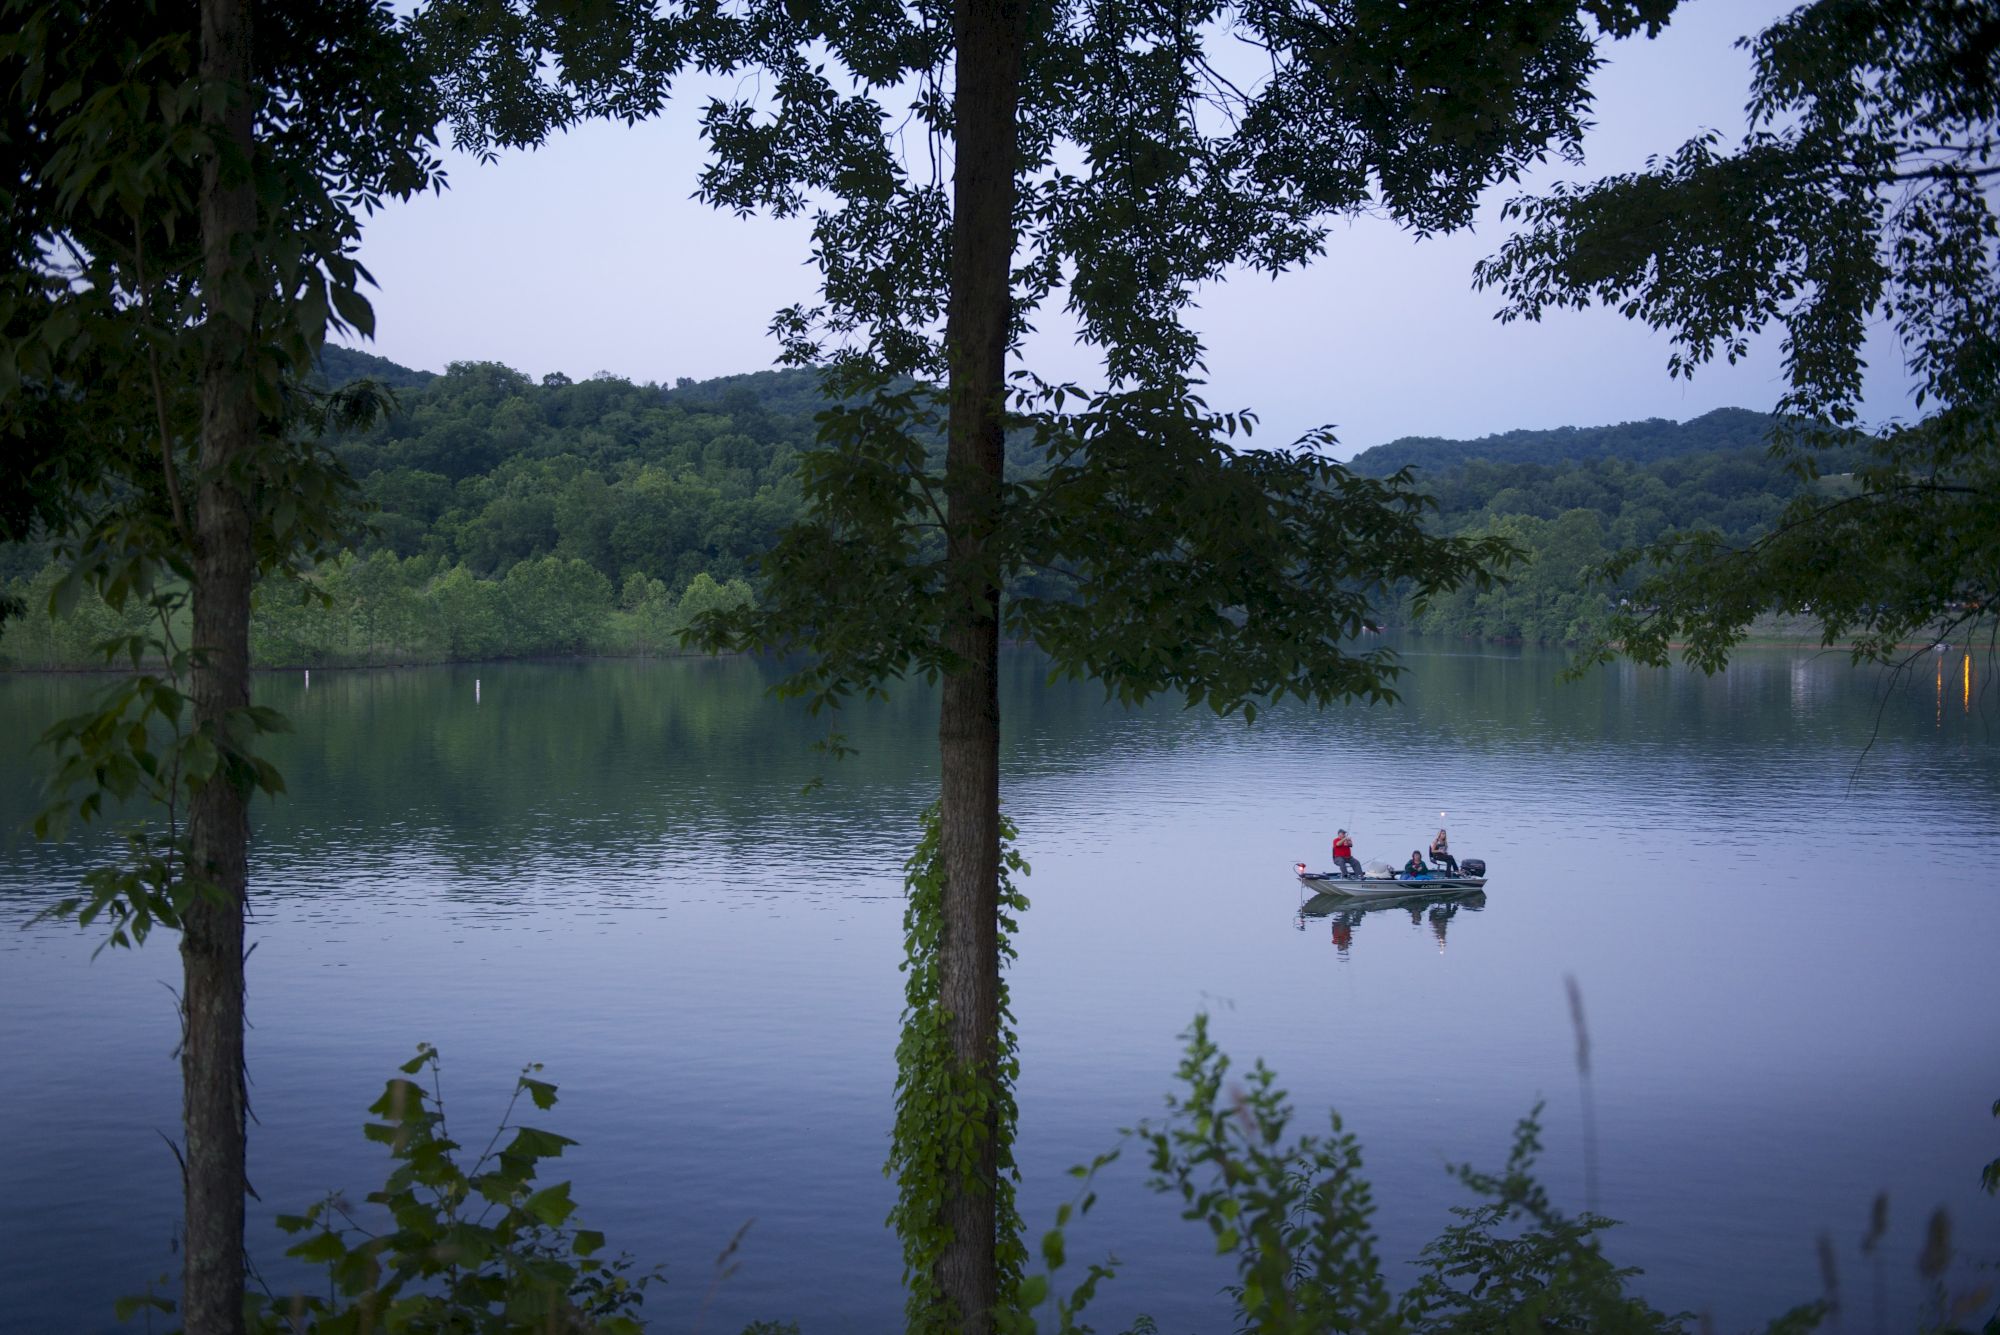 A serene lake scene with two people in a small boat, surrounded by trees and calm water, creating a peaceful and tranquil atmosphere.